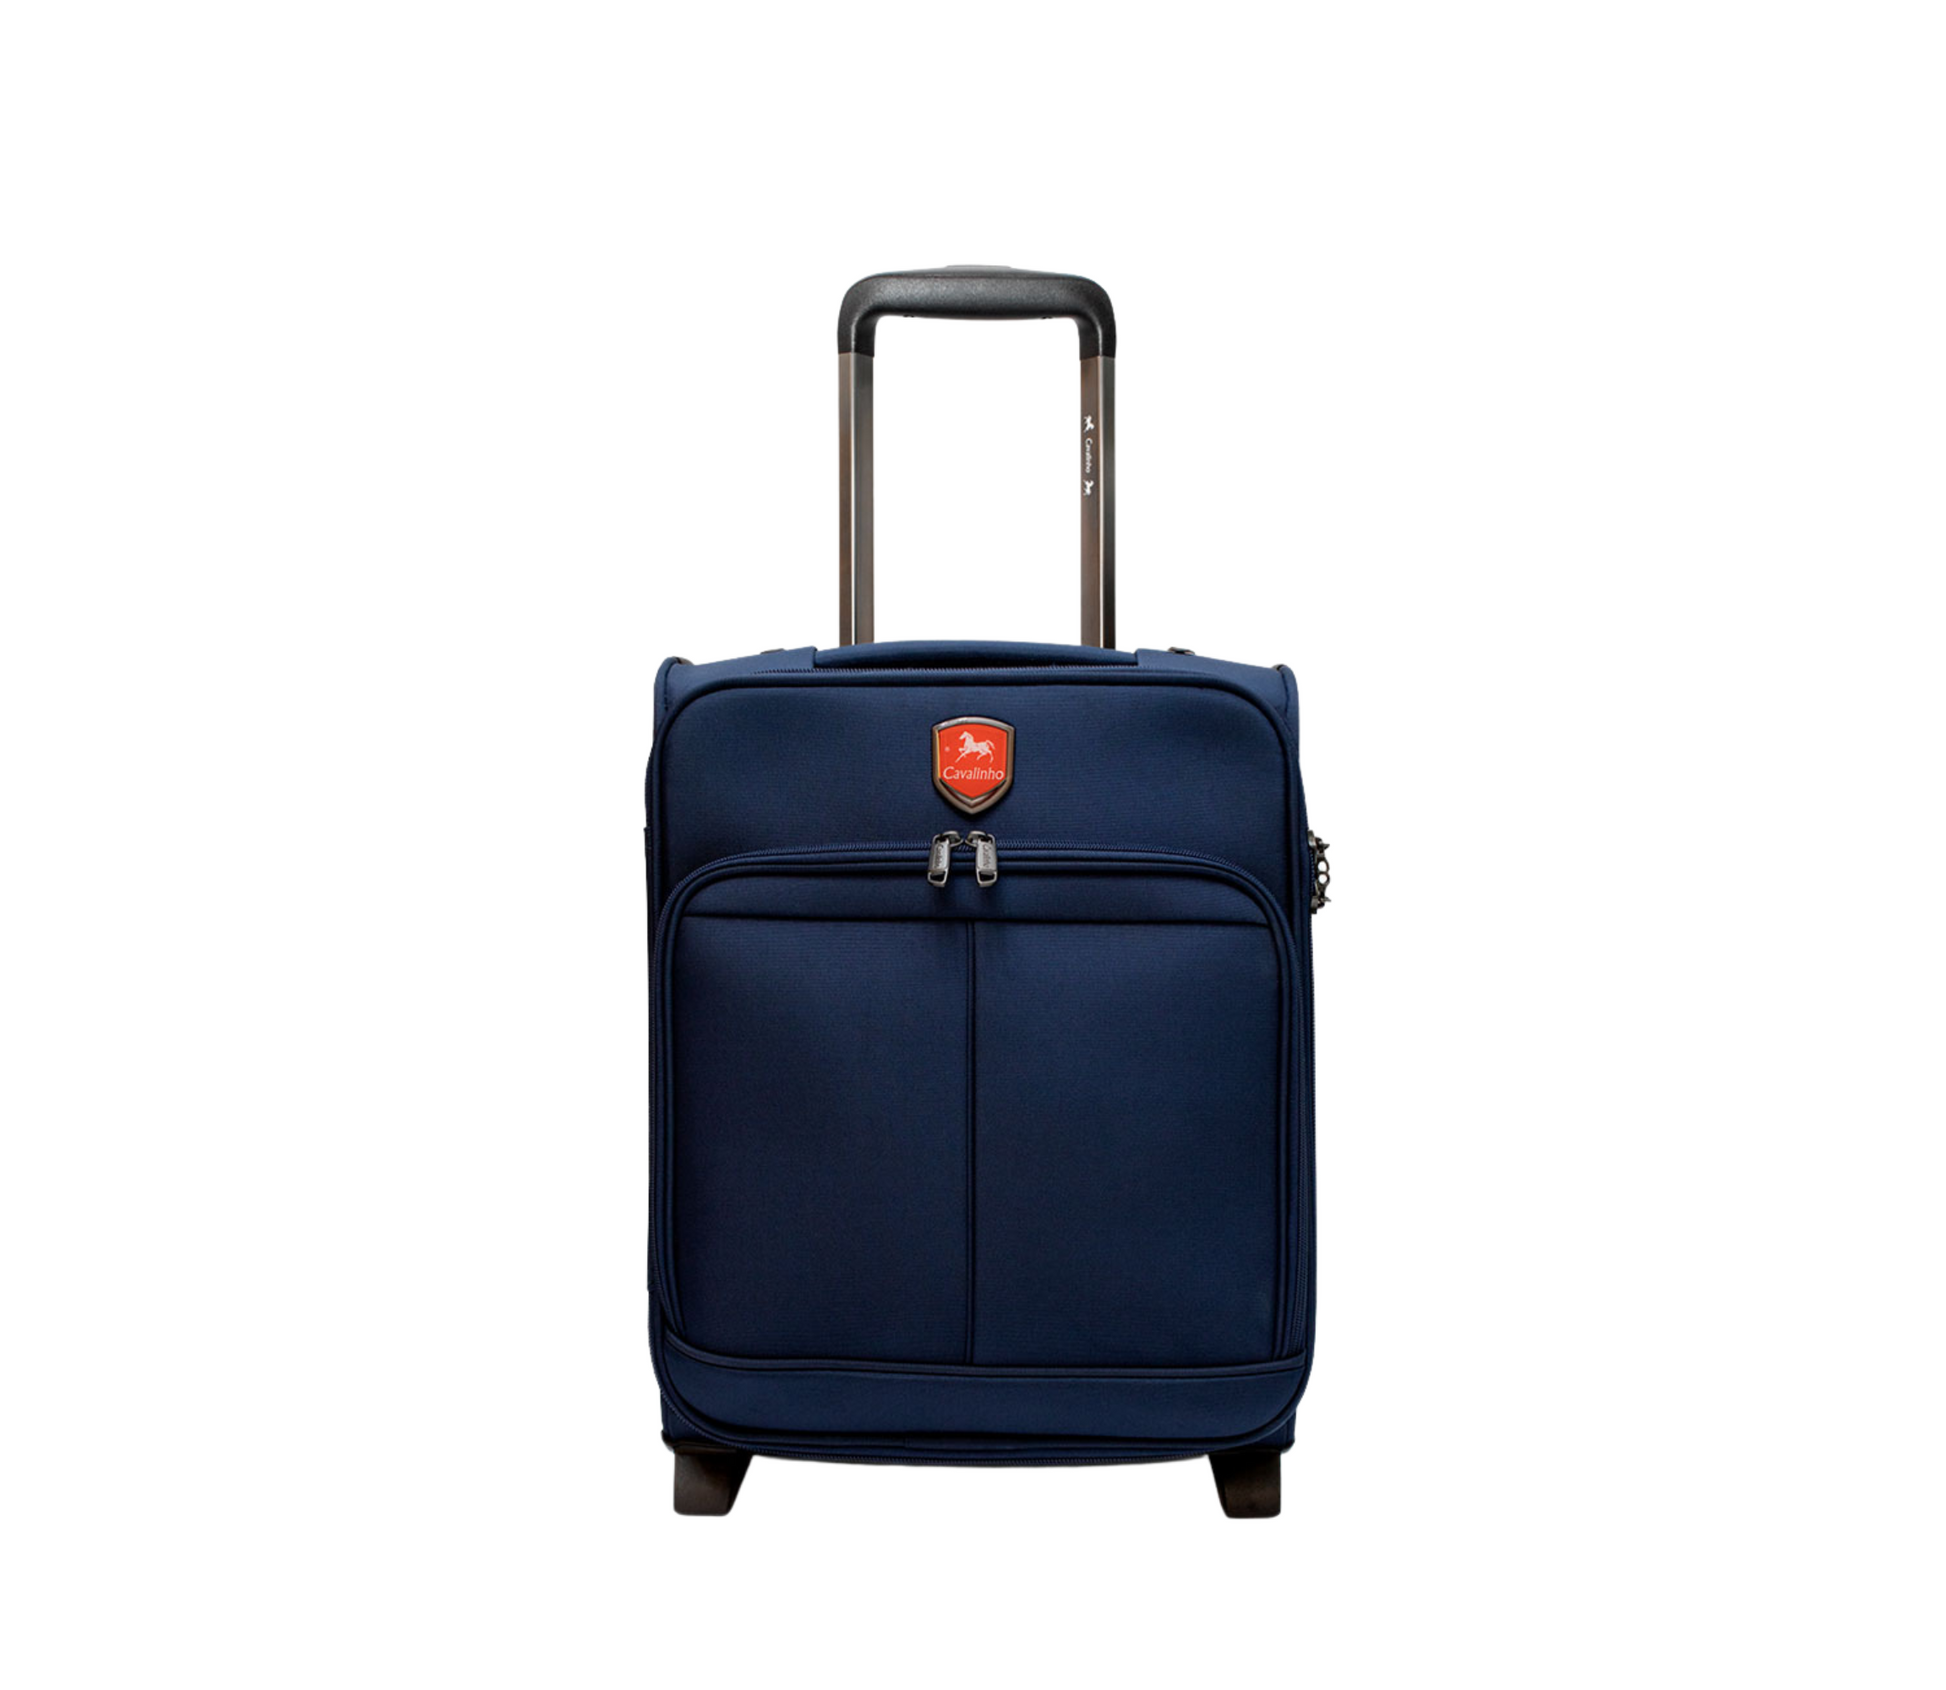 Cavalinho Carry-on Softside Cabin Luggage (16" or 19") - 16 inch SteelBlue - 68020003.03.16_P01